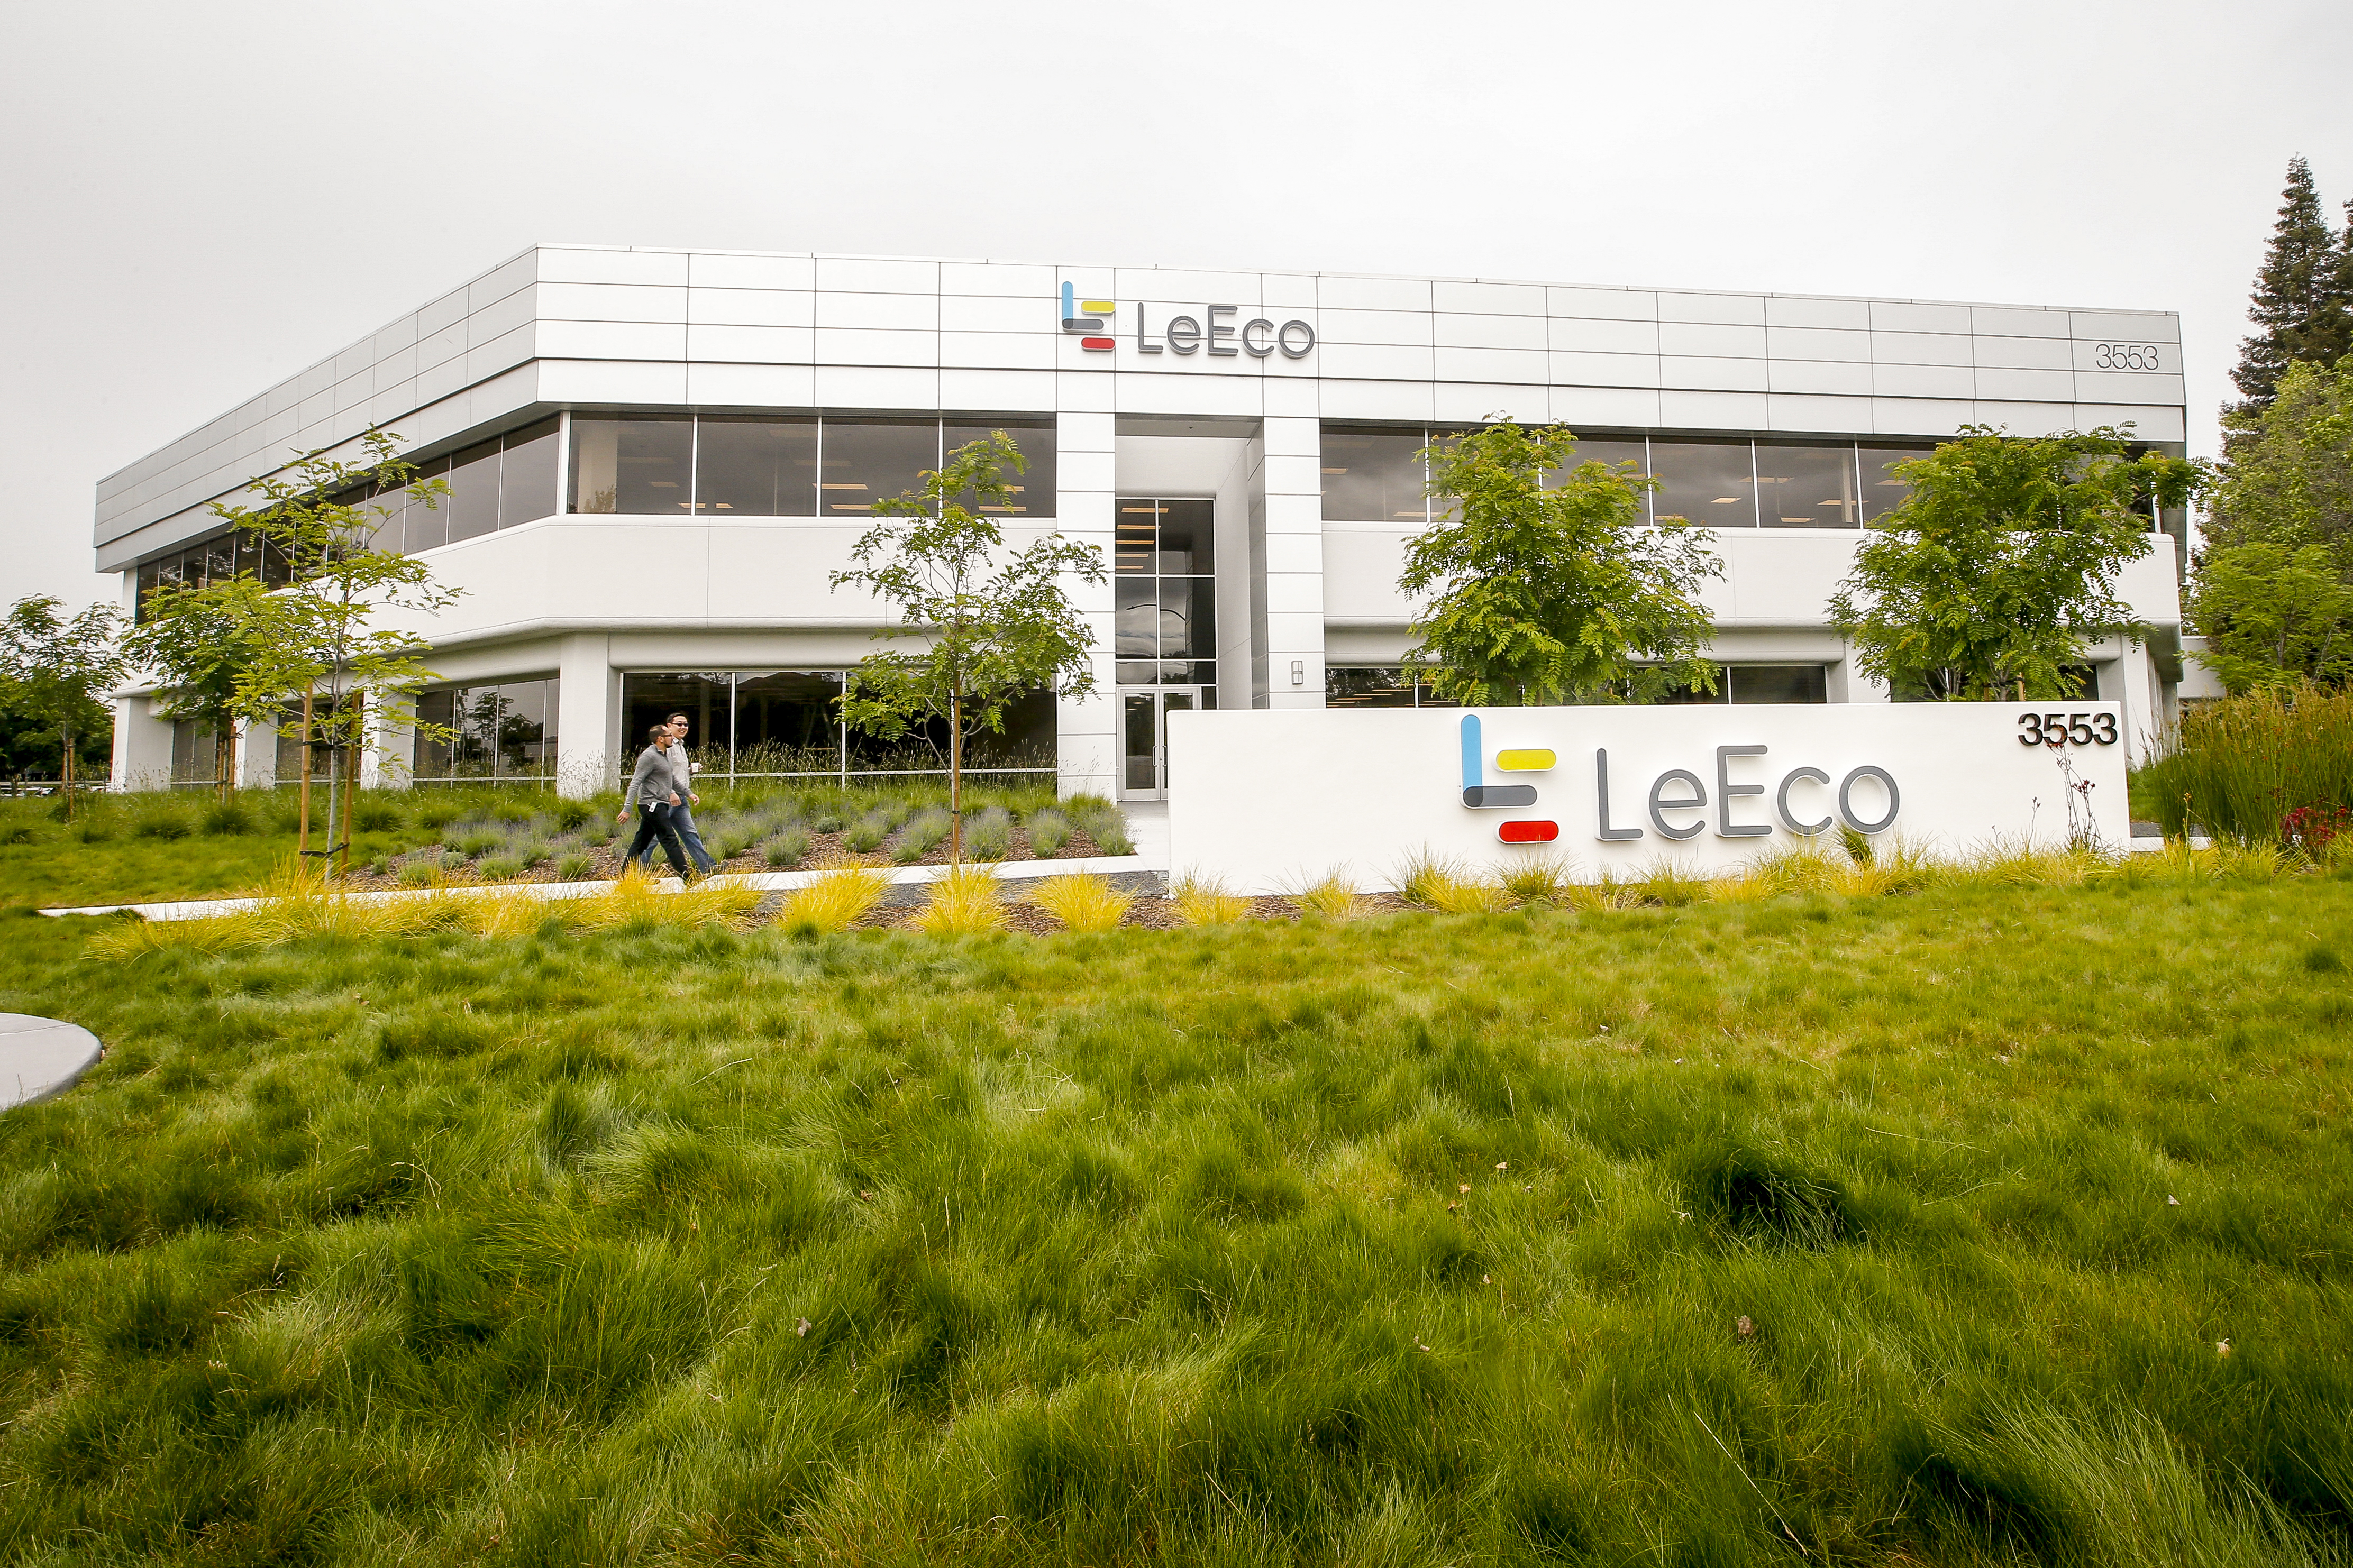 Exterior view of LeEco Headquarters on Wednesday, April 27, 2016, in San Jose, Calif. (Photo by Tony Avelar/Invision for LeEco/AP Images)